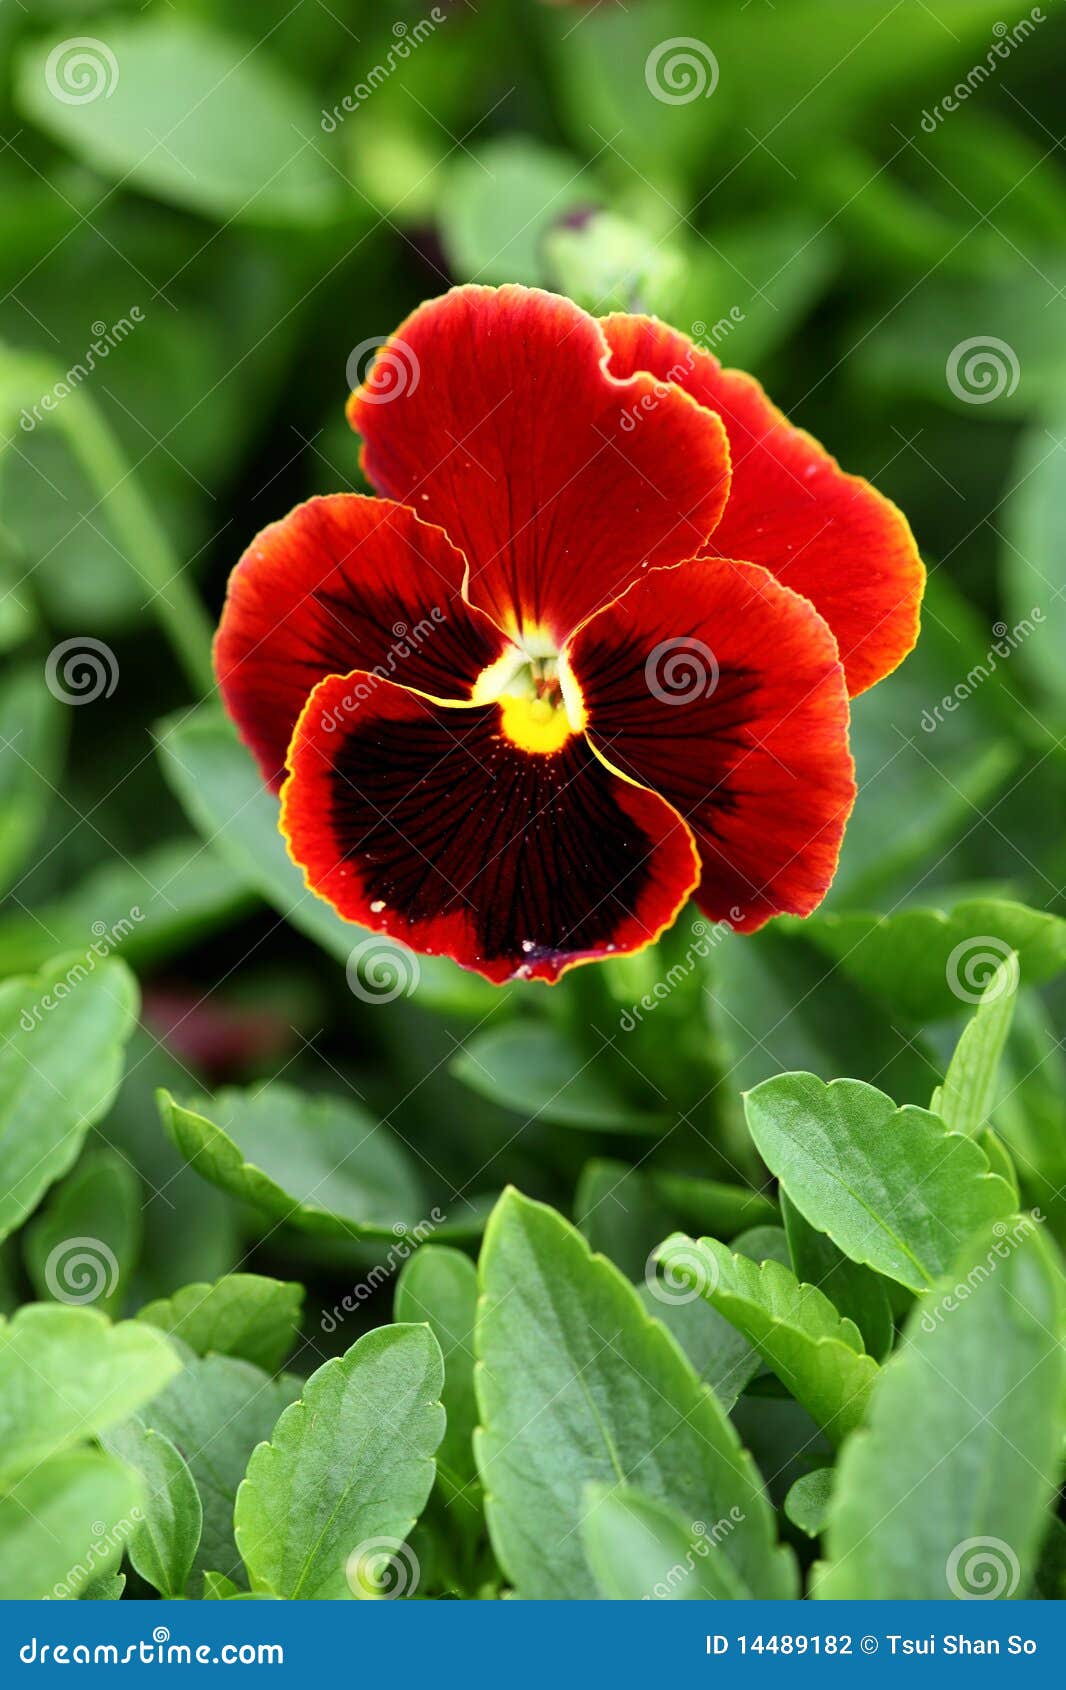 Bright red flower stock photo Image of green expo grass 